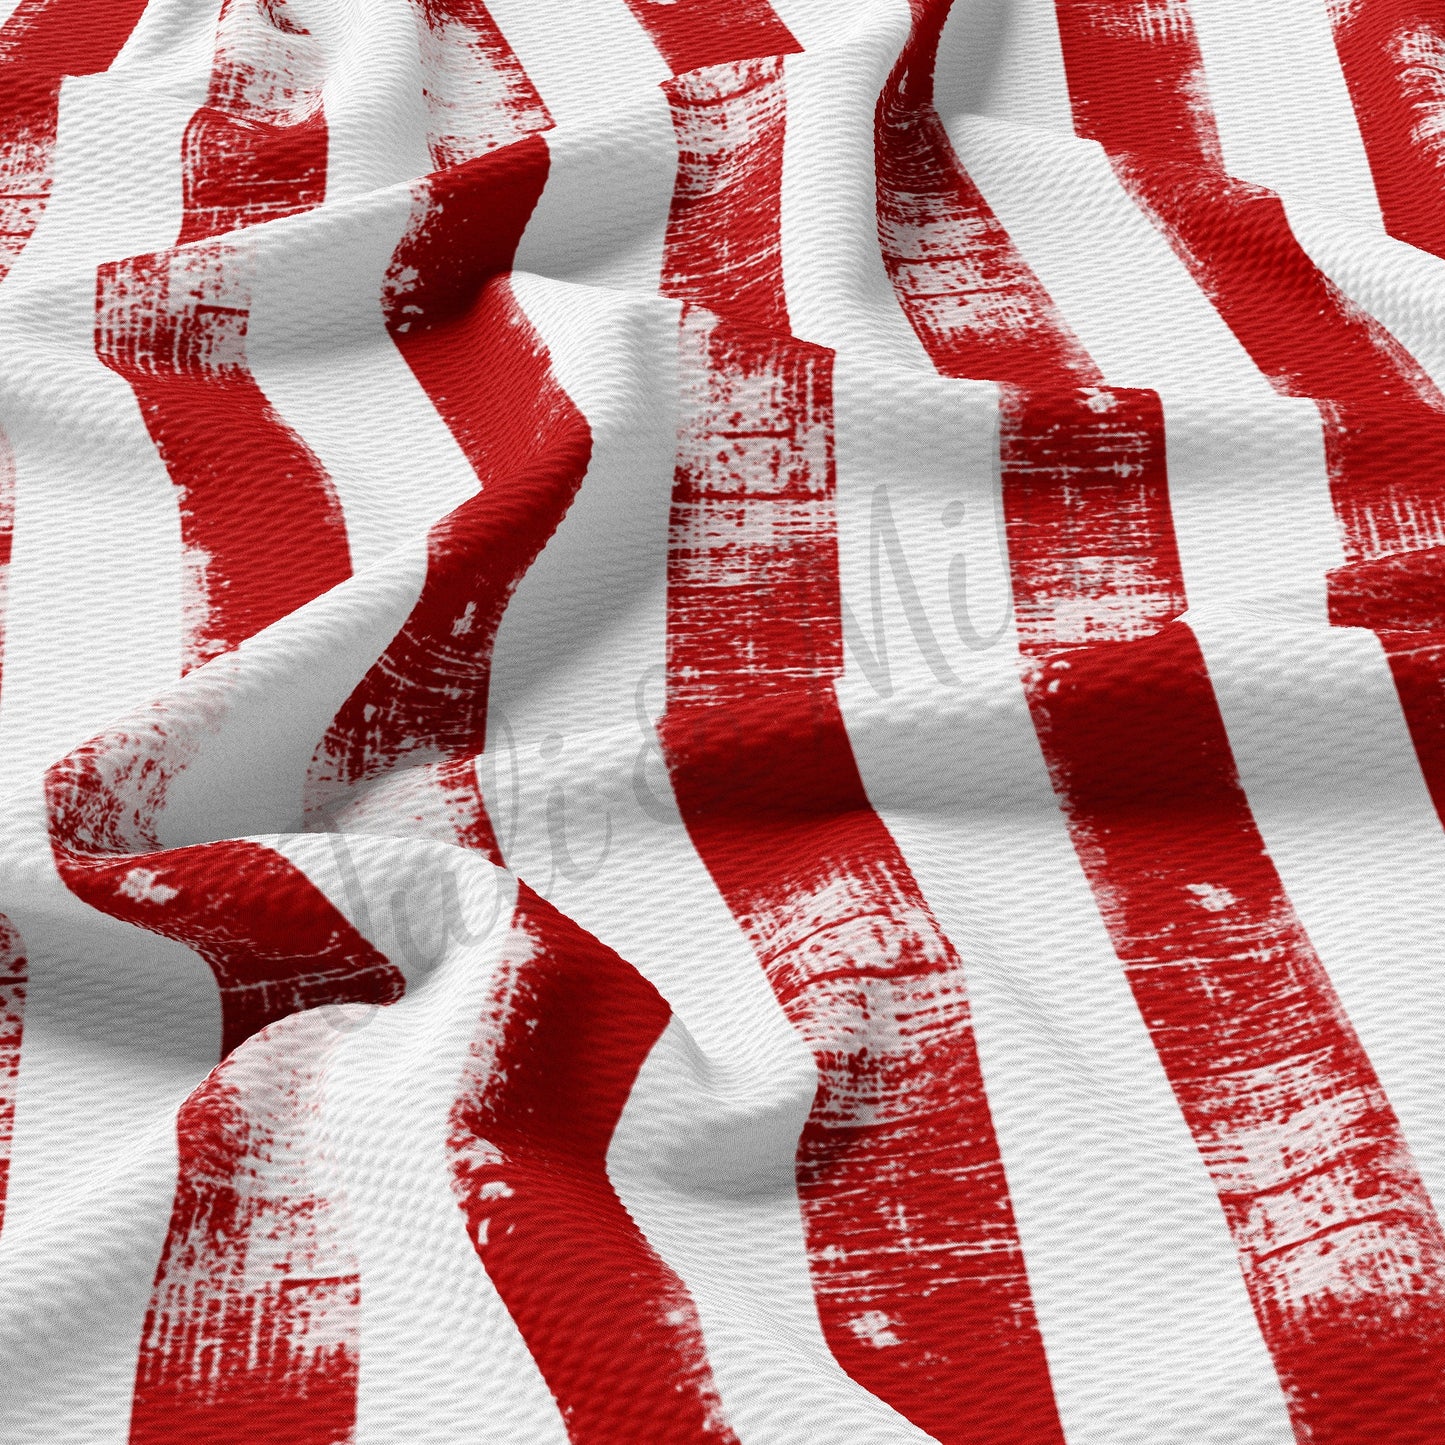 Vertical Distressed Stripes Patriotic 4th of July Fabric PT96